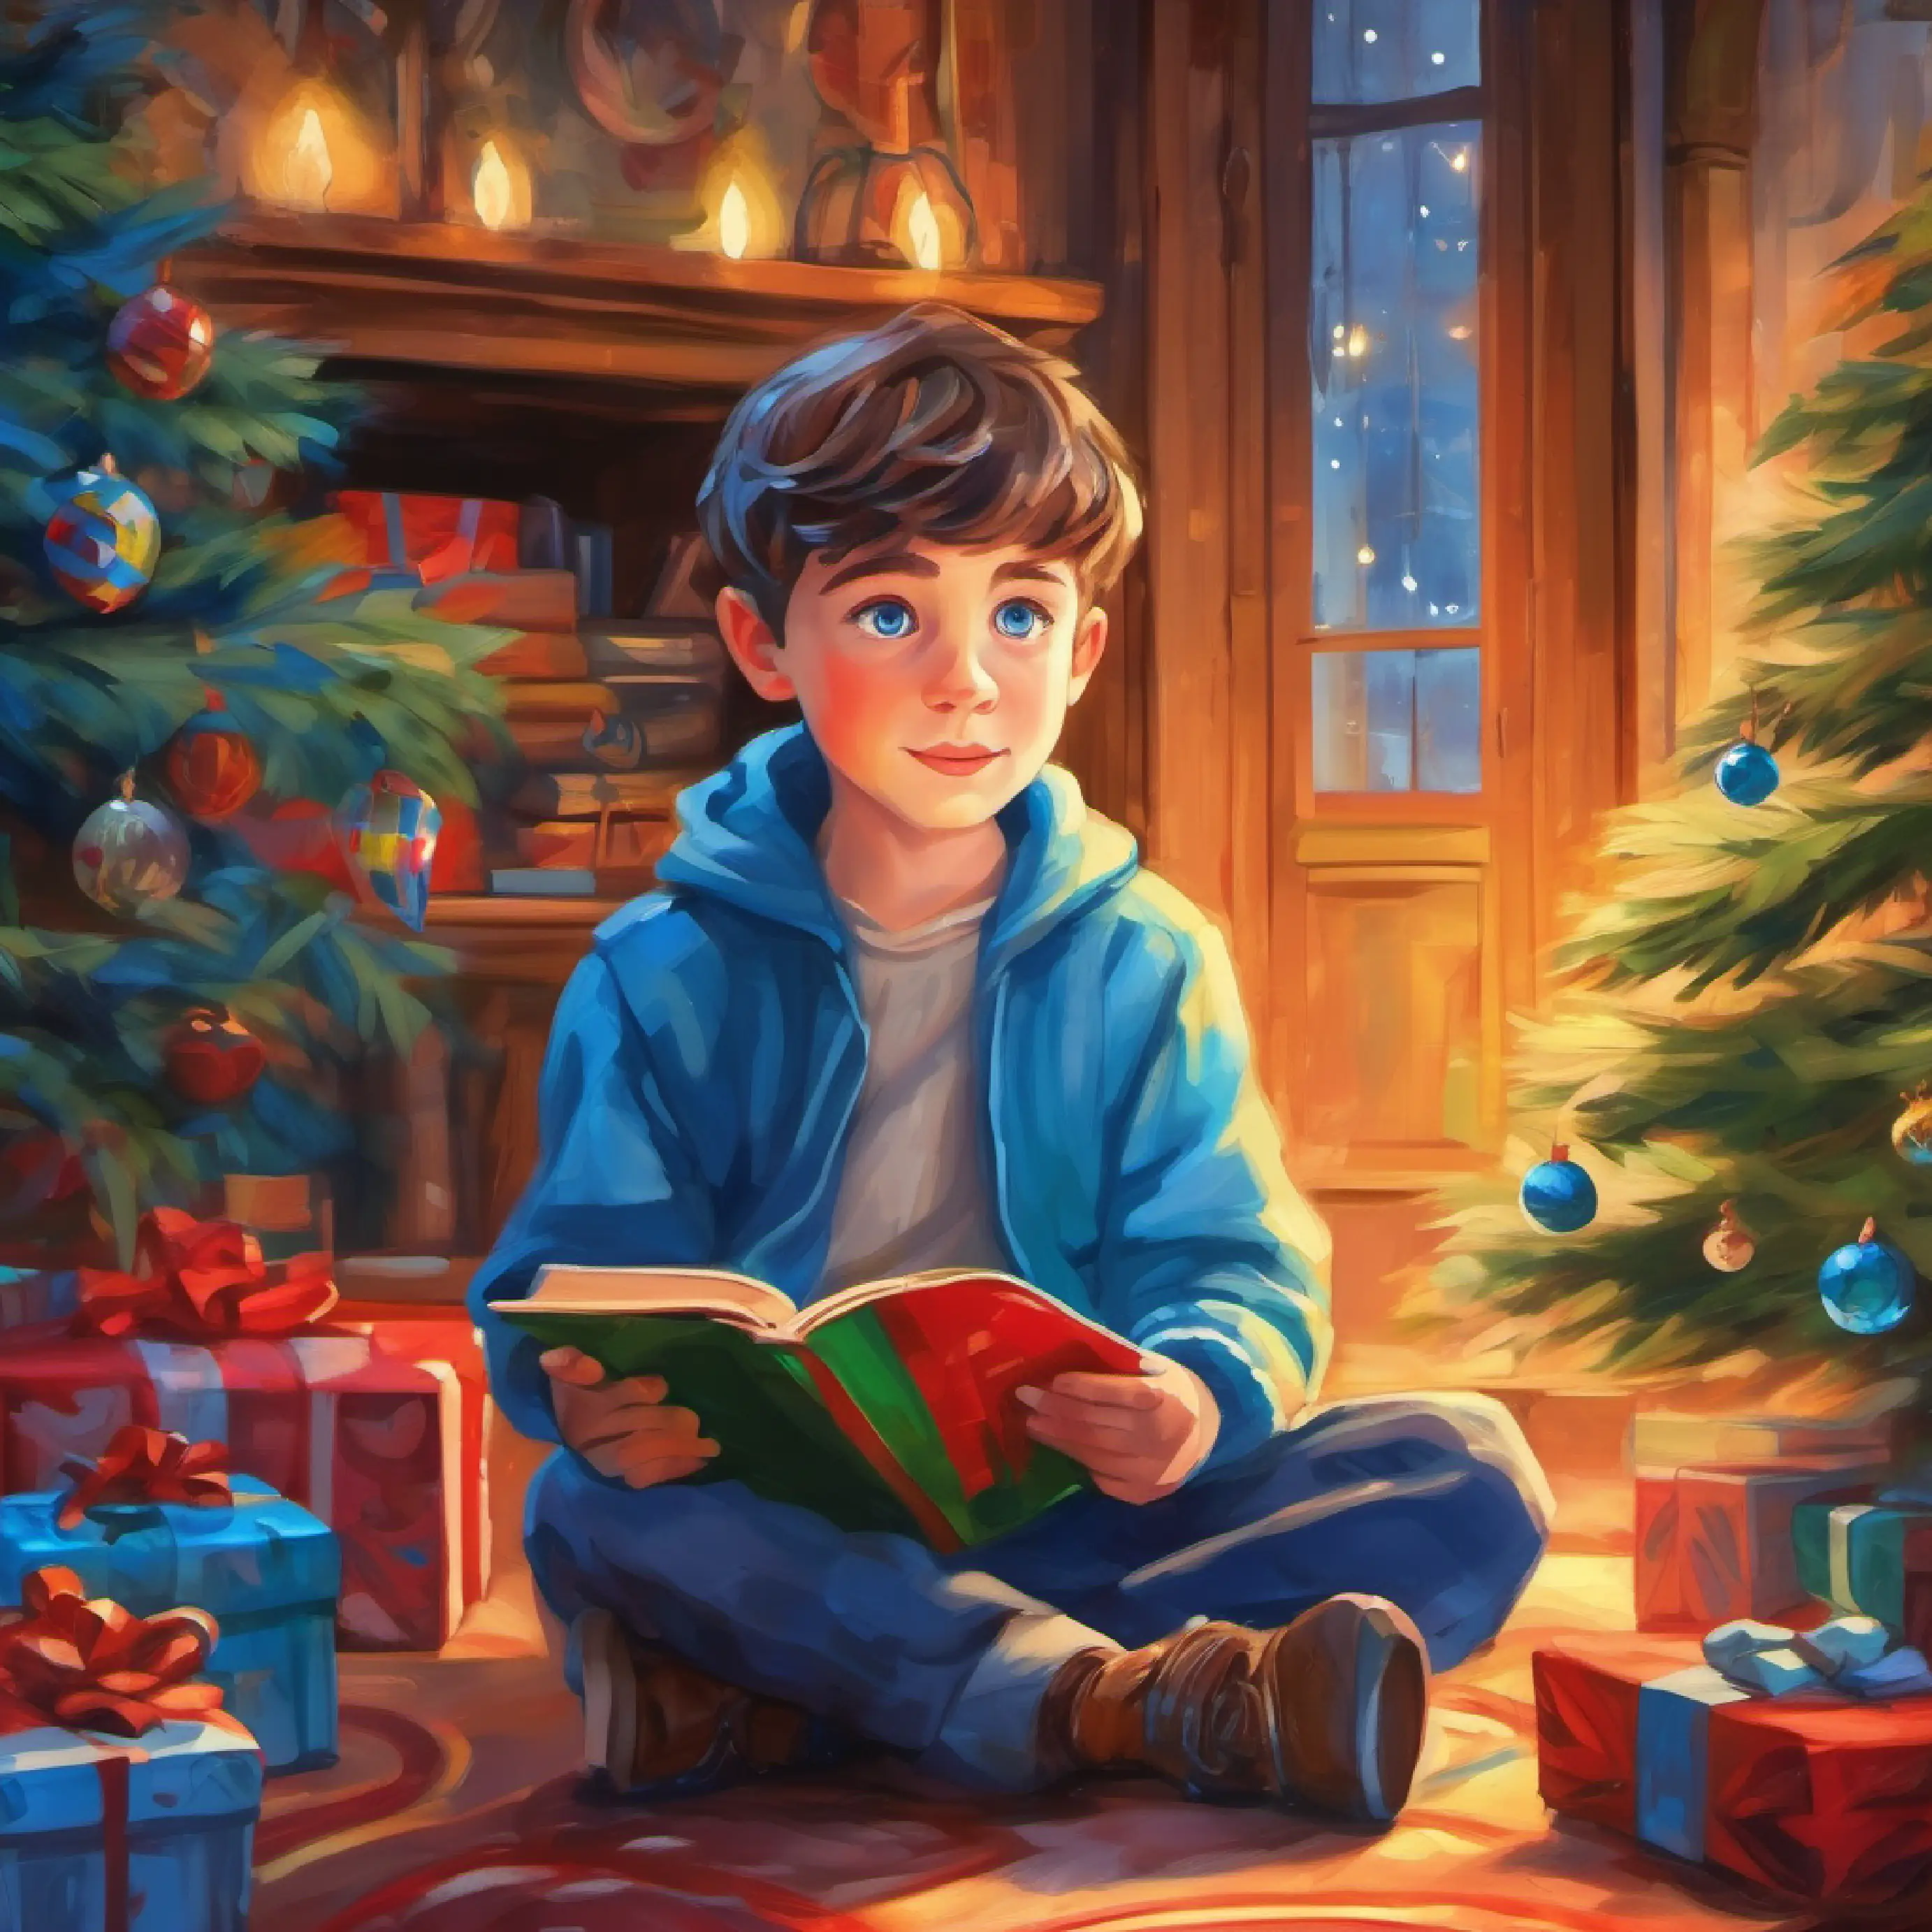 Young boy with bright blue eyes, spirited and imaginative learns about responsibility and friendship